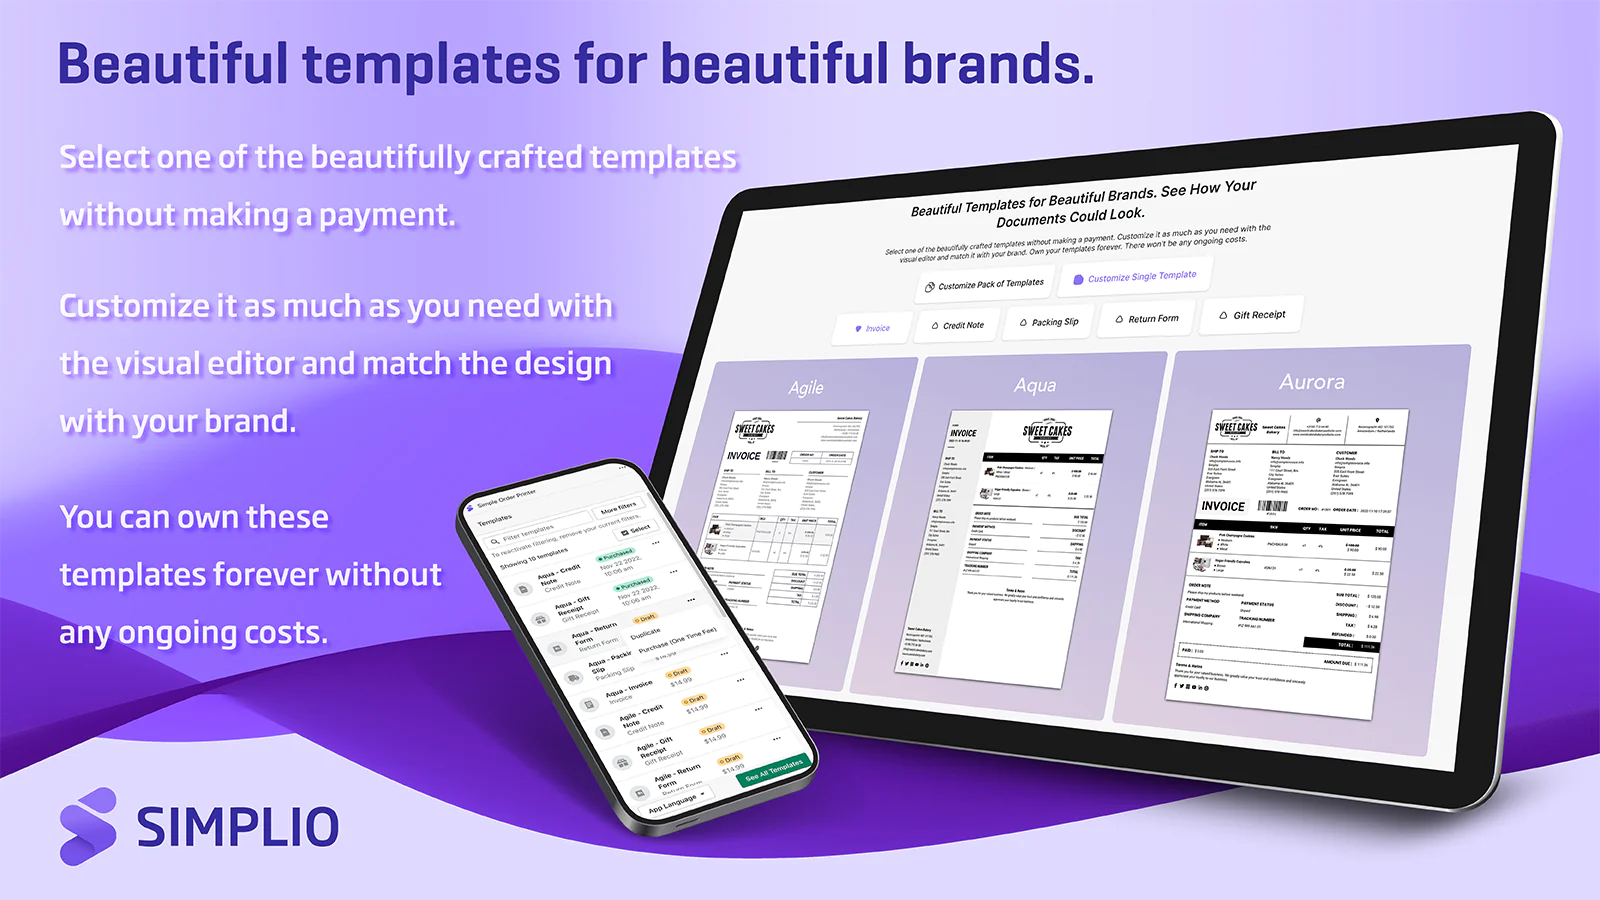 You can create invoice, packing slip, credit note, return form and gift receipt templates.